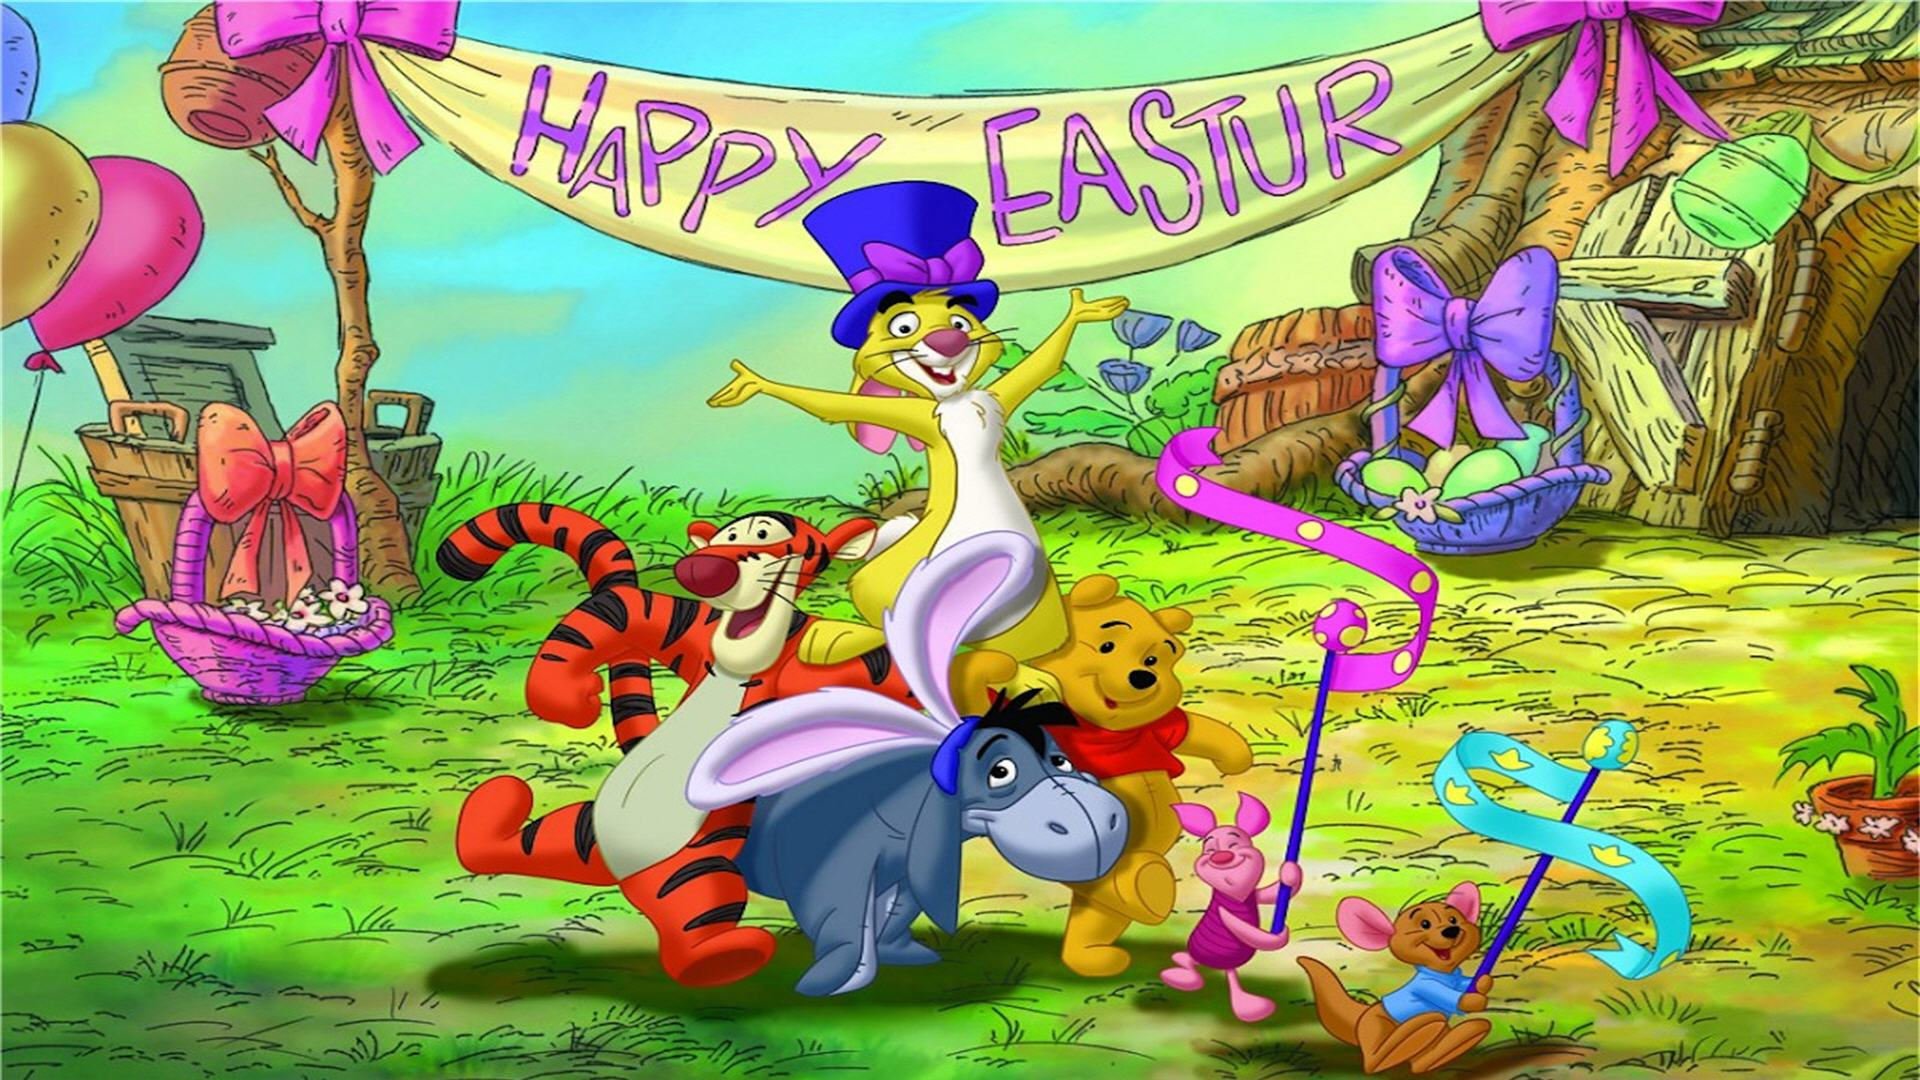 Winnie The Pooh Easter wallpaper 178469